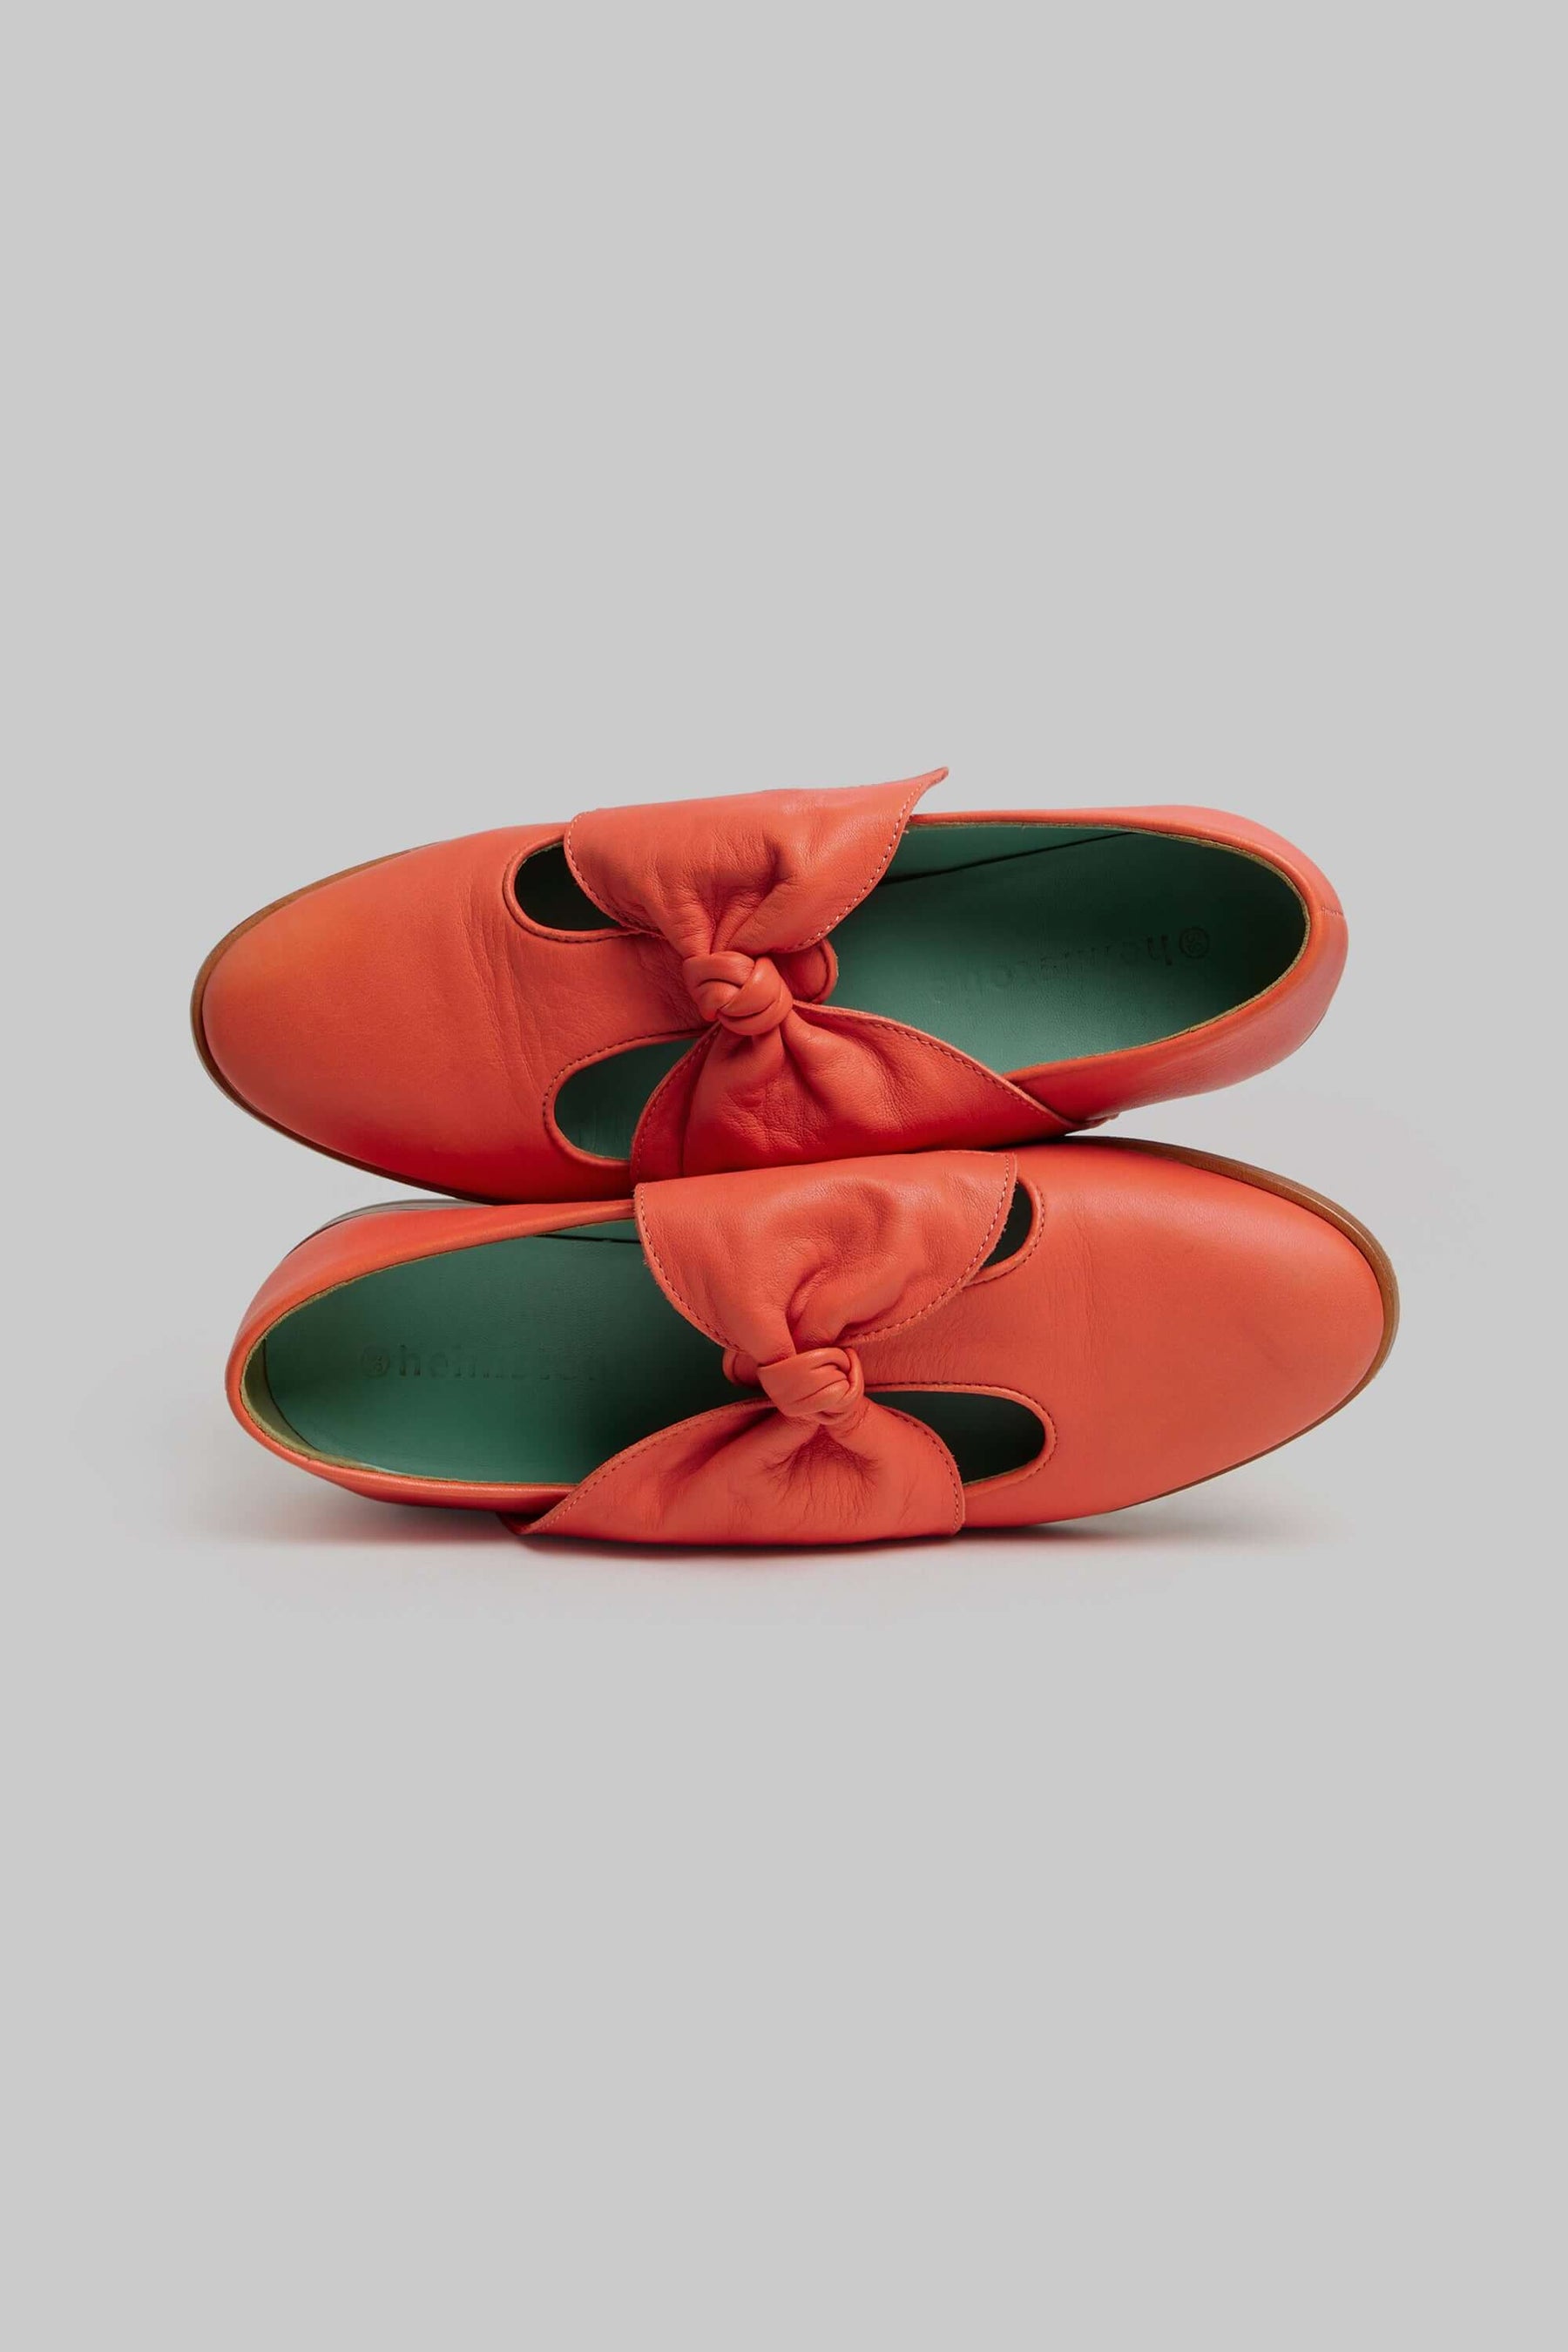 BB ballerina shoes in salmon leather